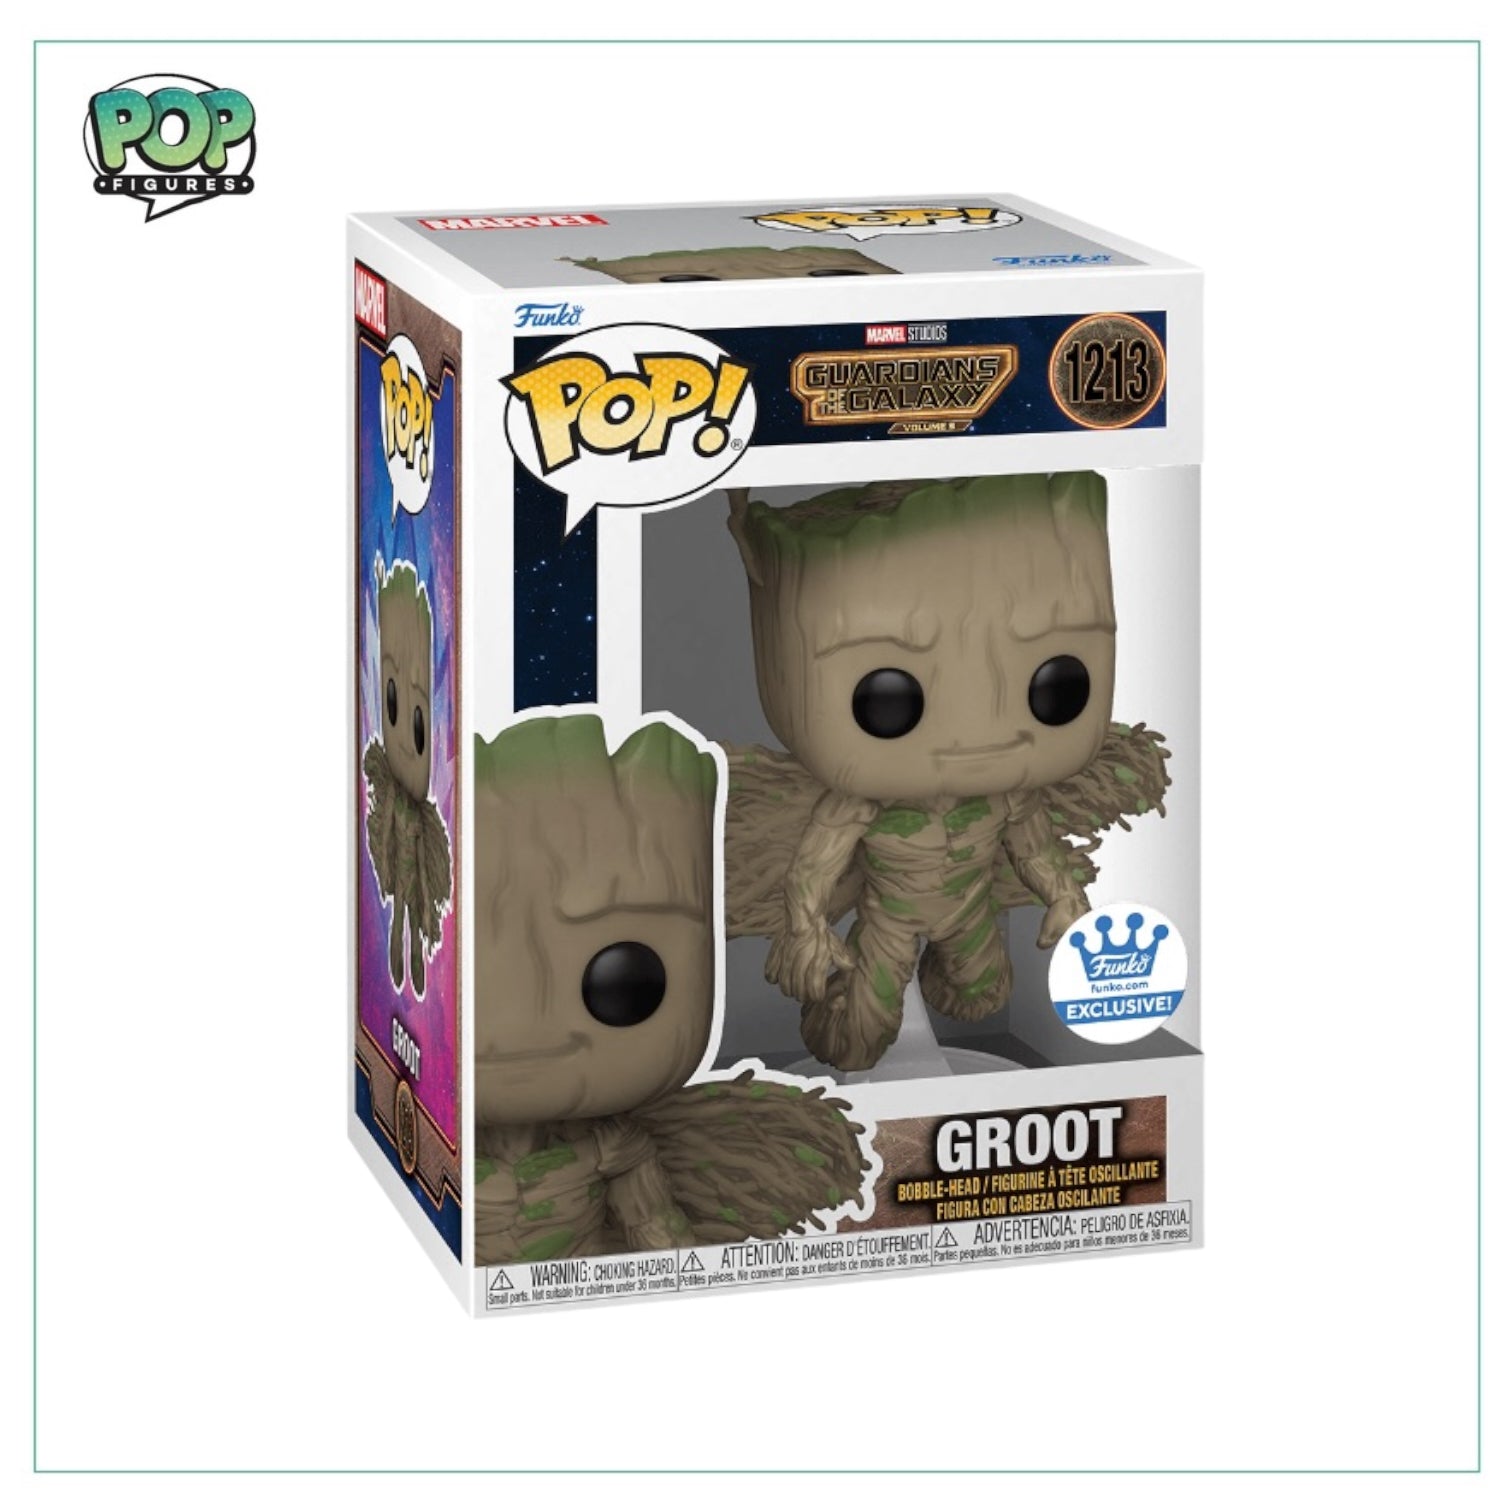 Groot #1213 (w/ Wings) Funko Pop! - Guardians of the Galaxy Volume 3 - Funko Shop Exclusive - Angry Cat